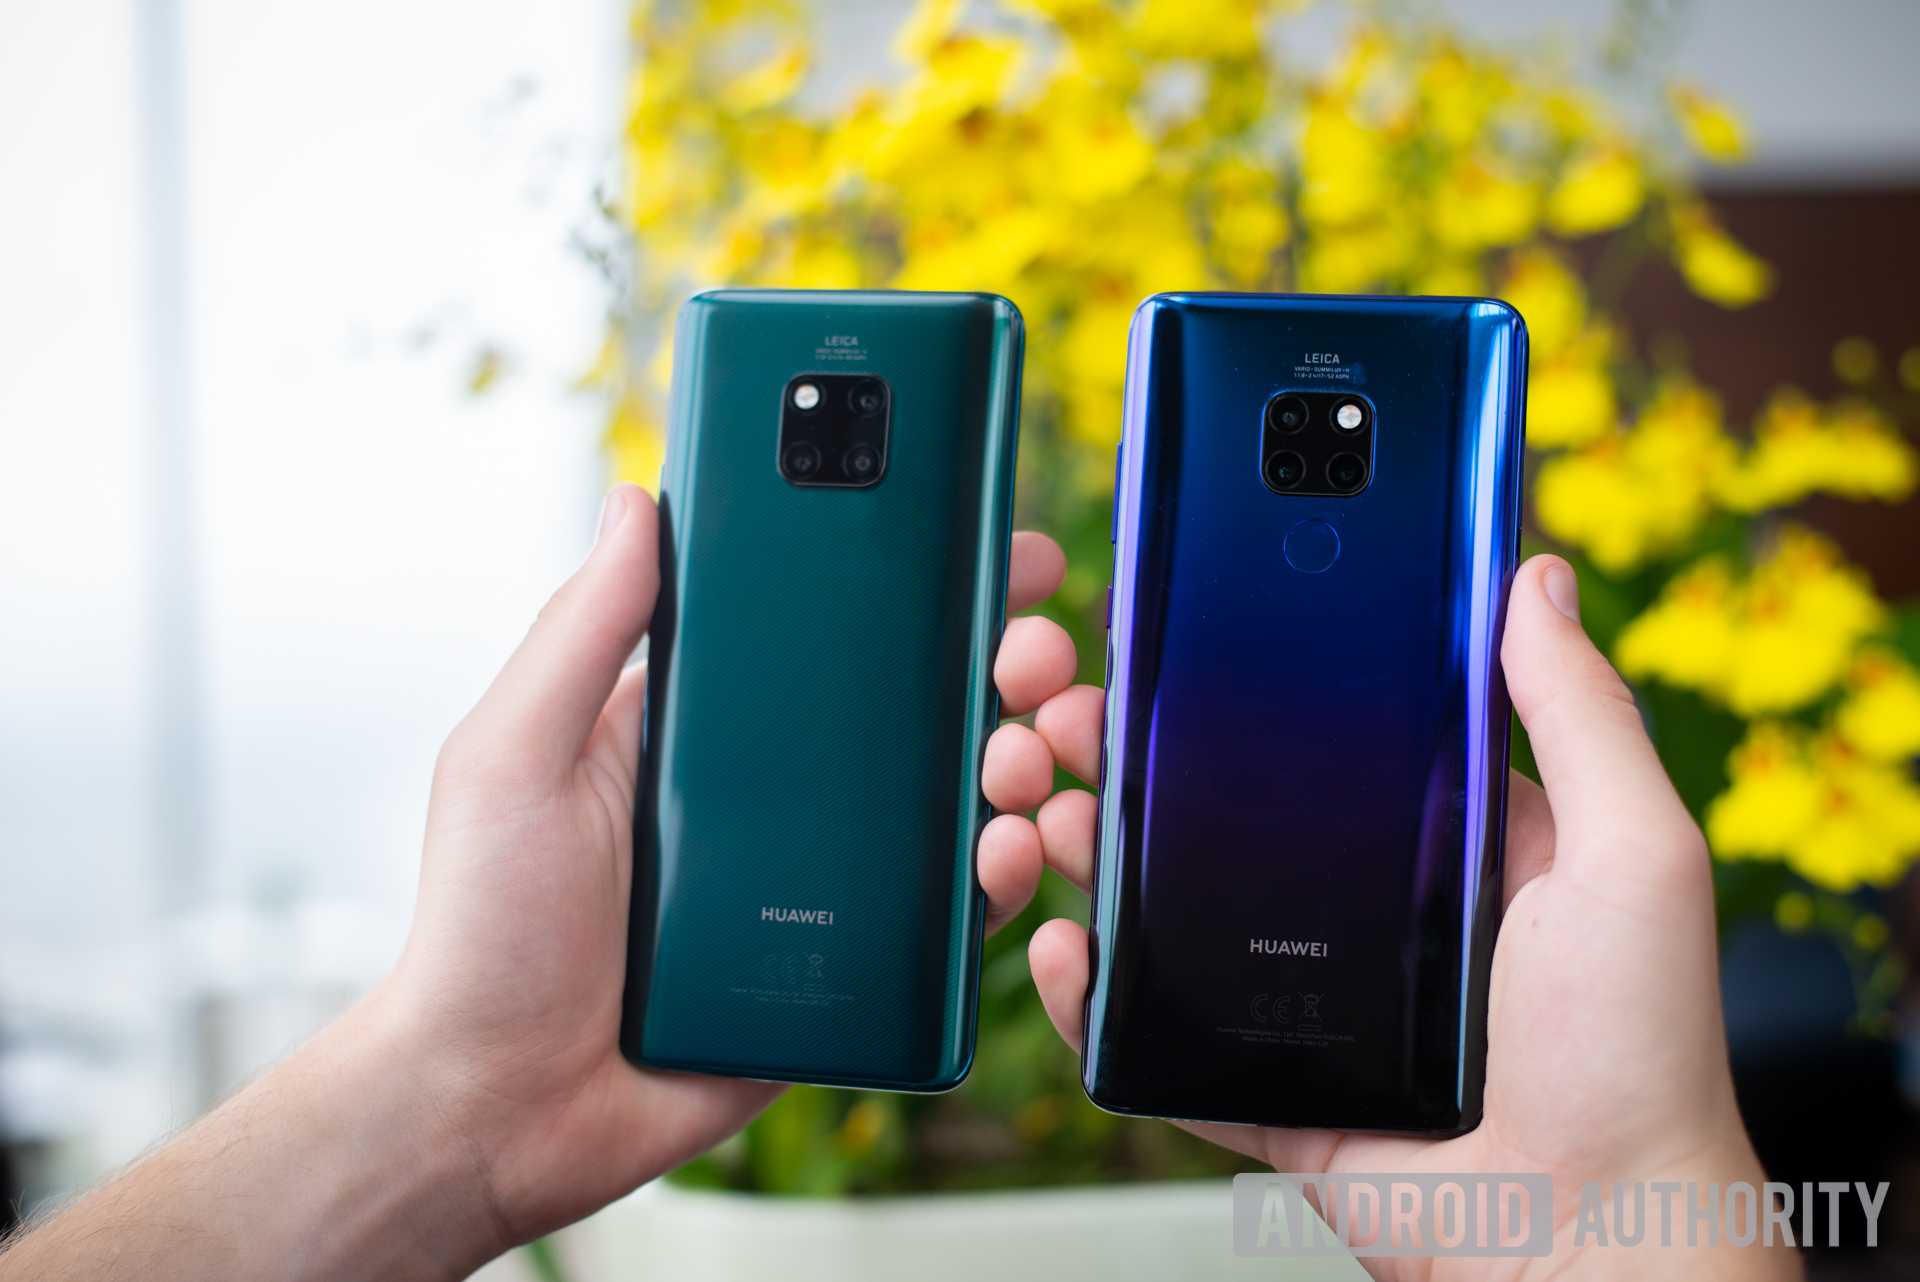 HUAWEI Mate 20 Pro and Mate Specs, release date, price